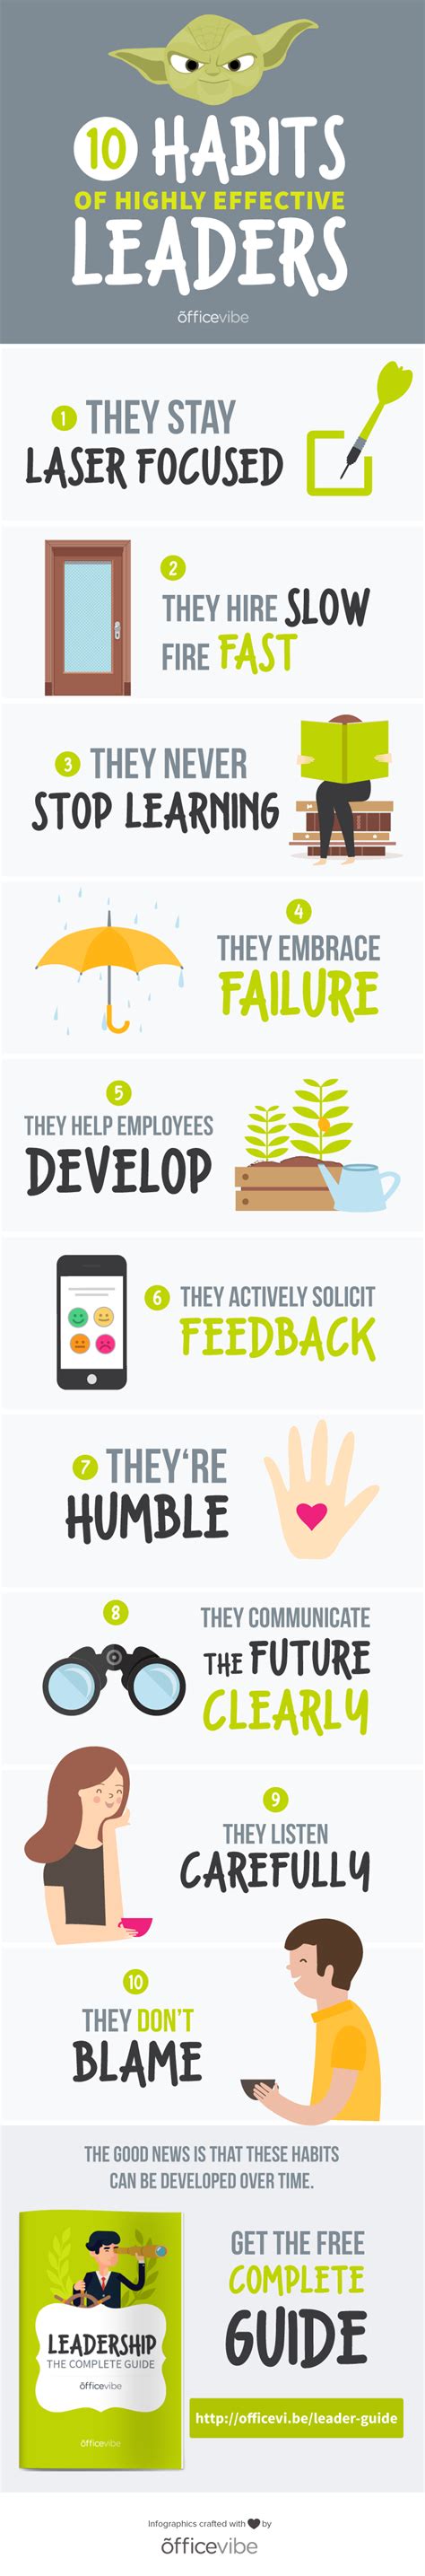 10 Habits Of Highly Effective Leaders Infographic Business 2 Community